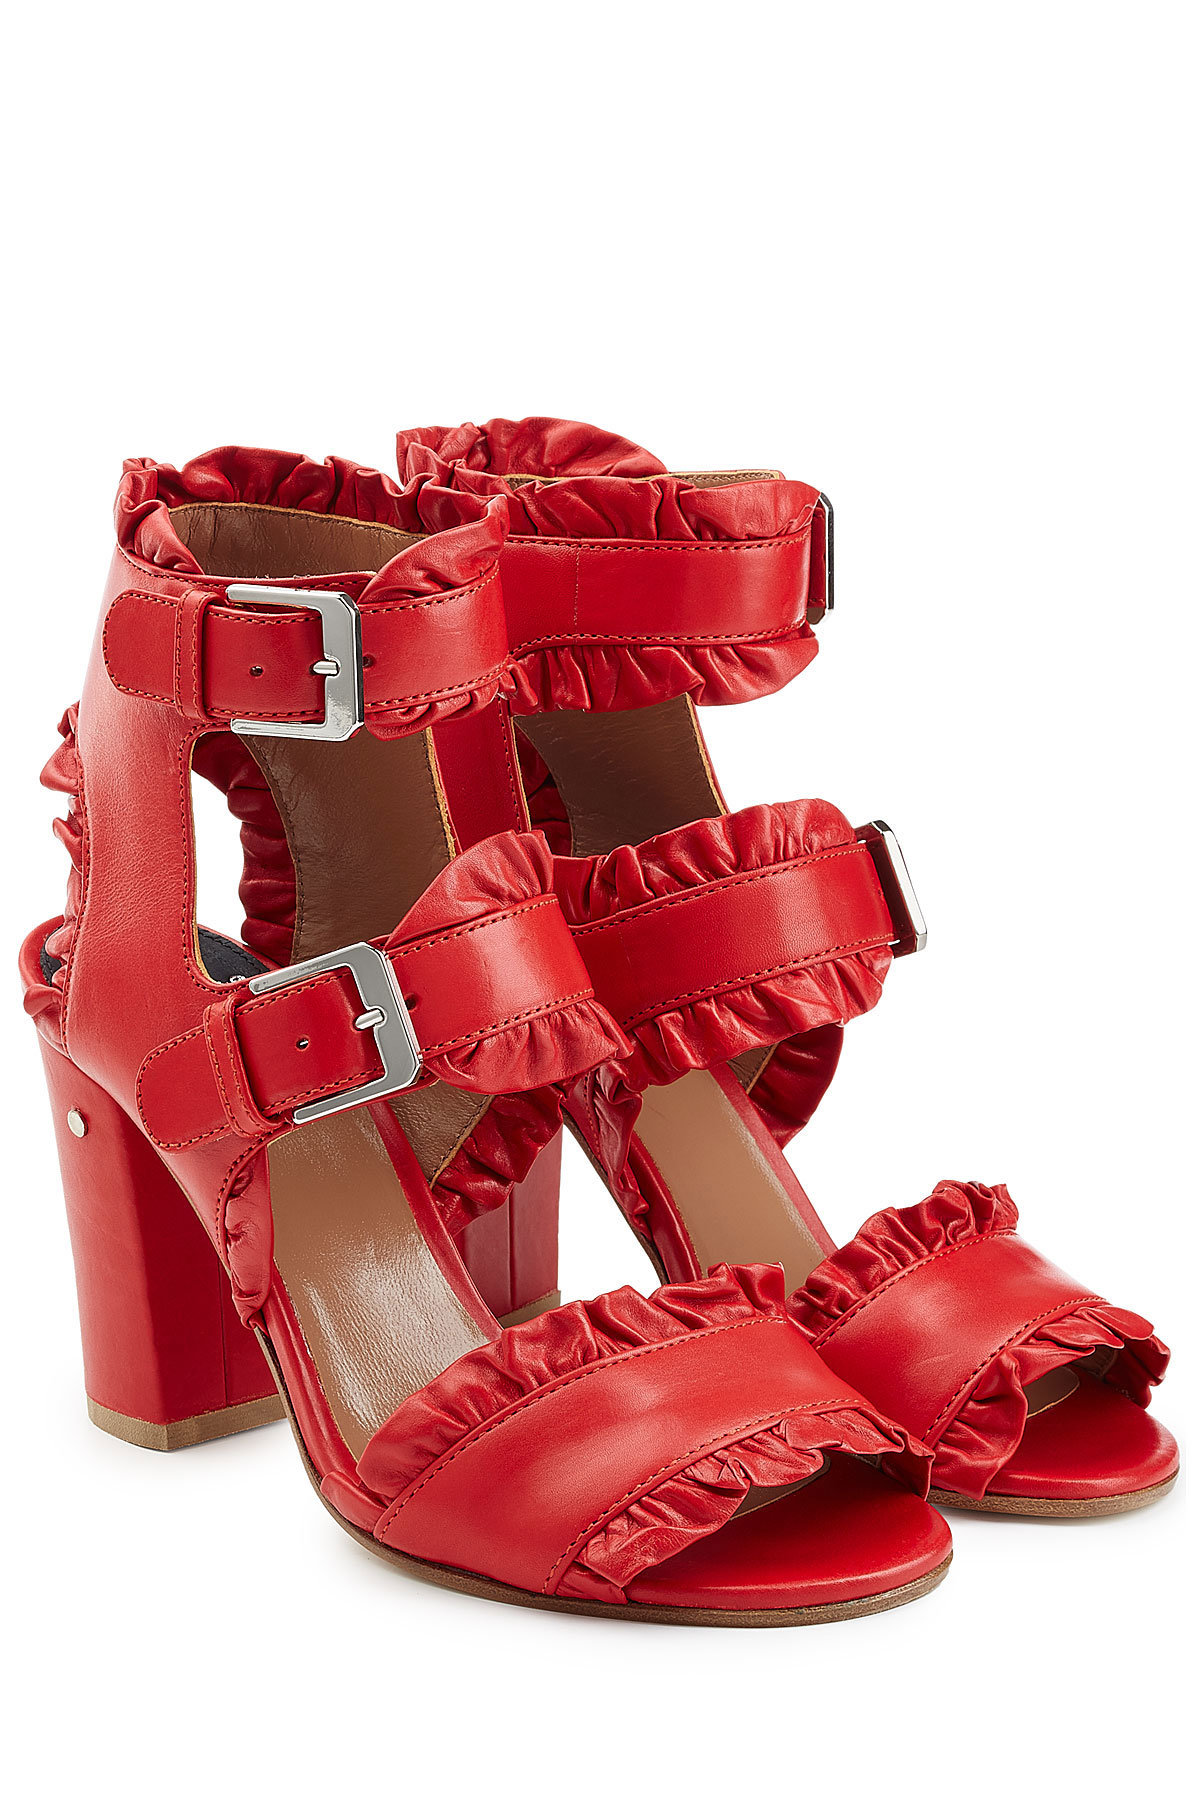 Laurence Dacade - Ruffled Leather Sandals